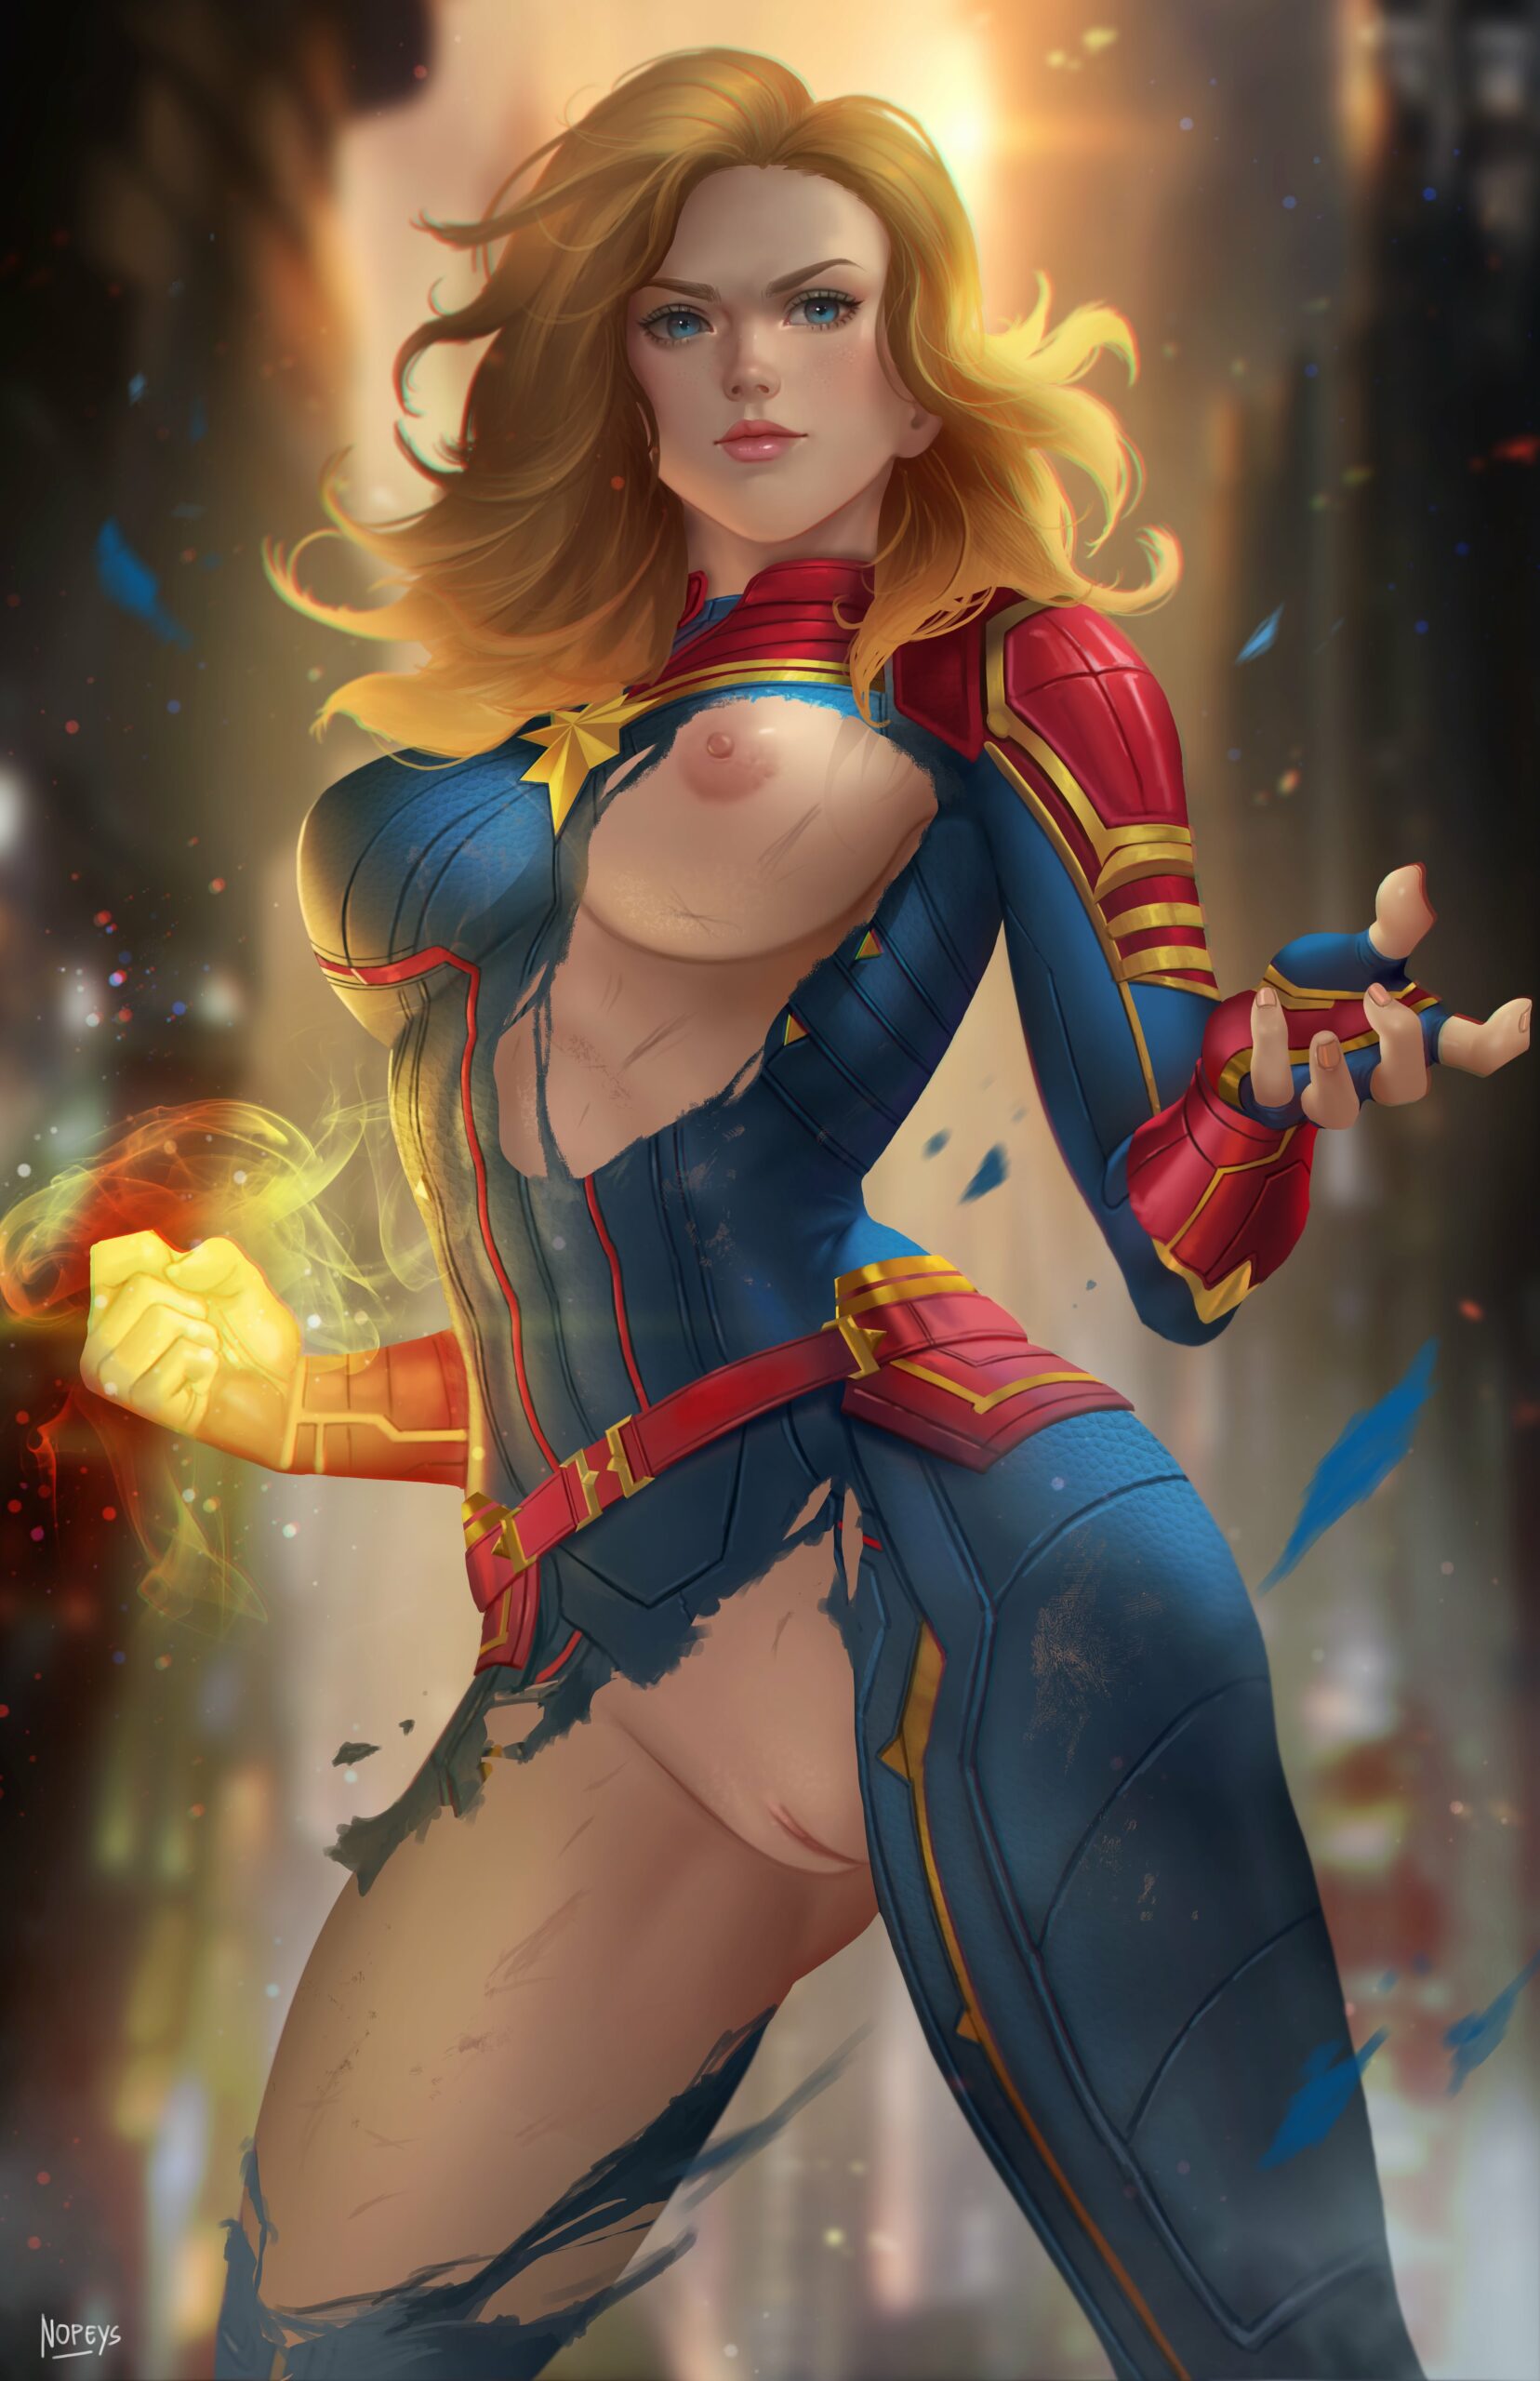 Captain Marvel Looks Sexier When Her Clothes Are Ripped in Battle by Nopeys | Marvel